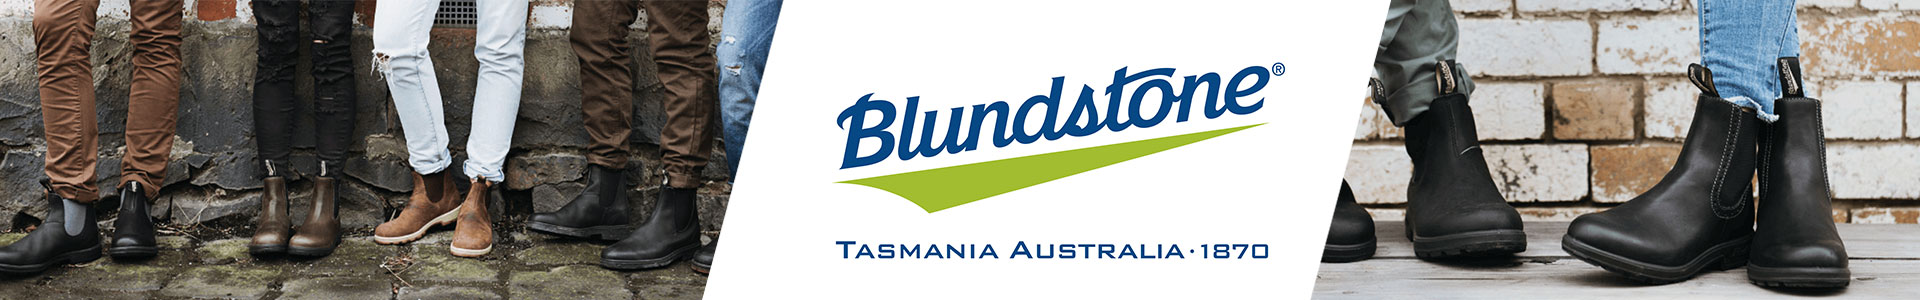 Blundstone Boots for Women and Men 